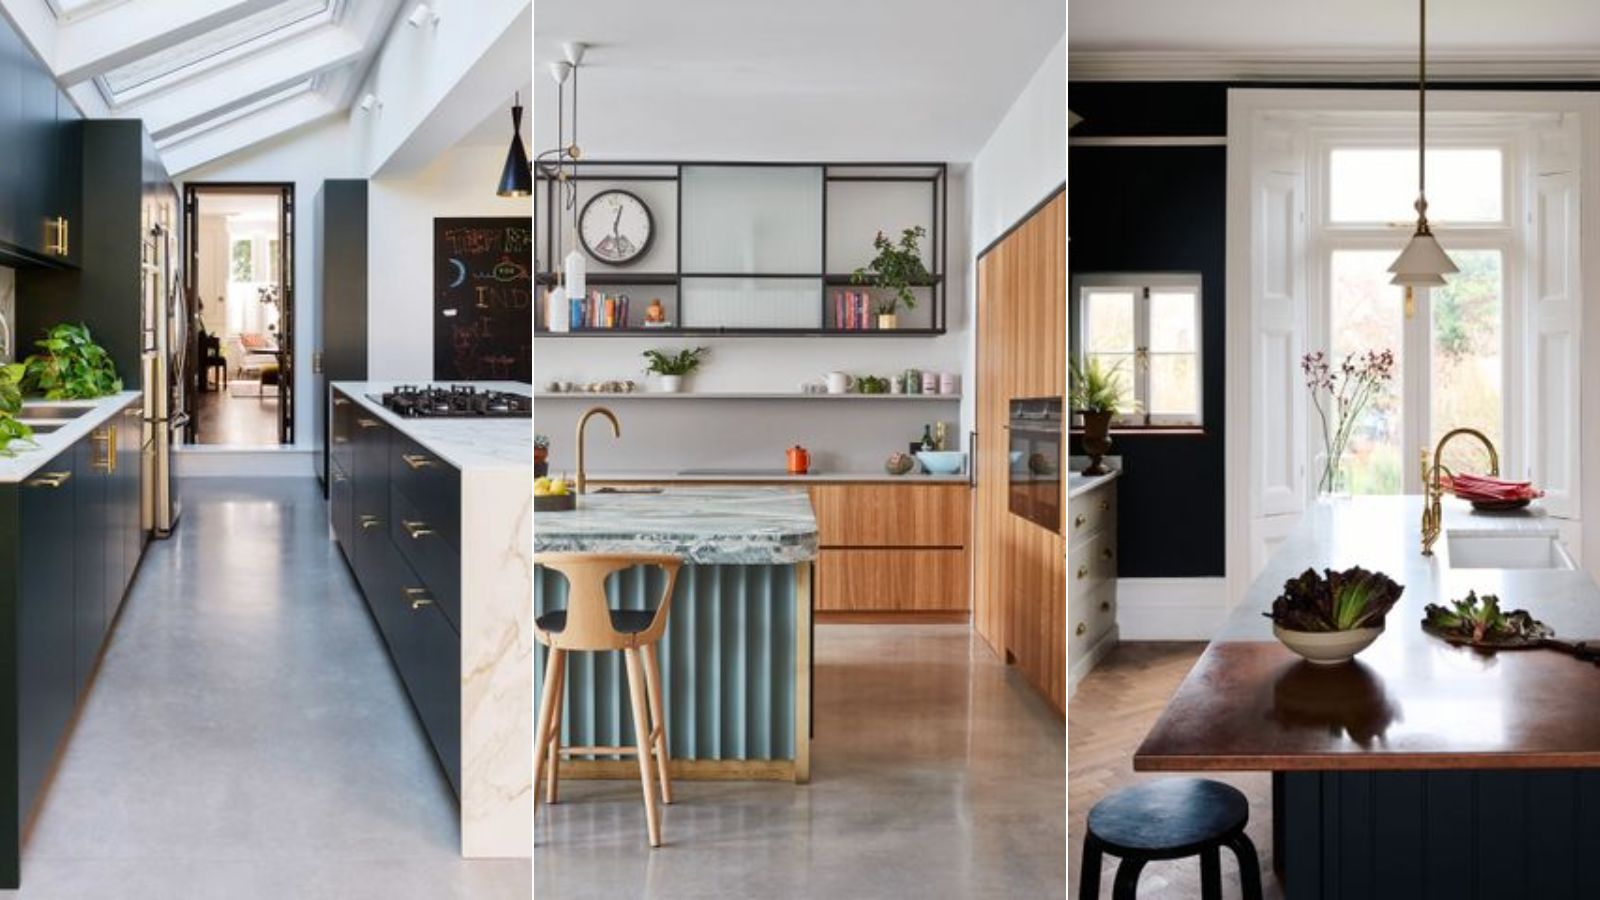 6 kitchen flooring ideas to make your space appear bigger